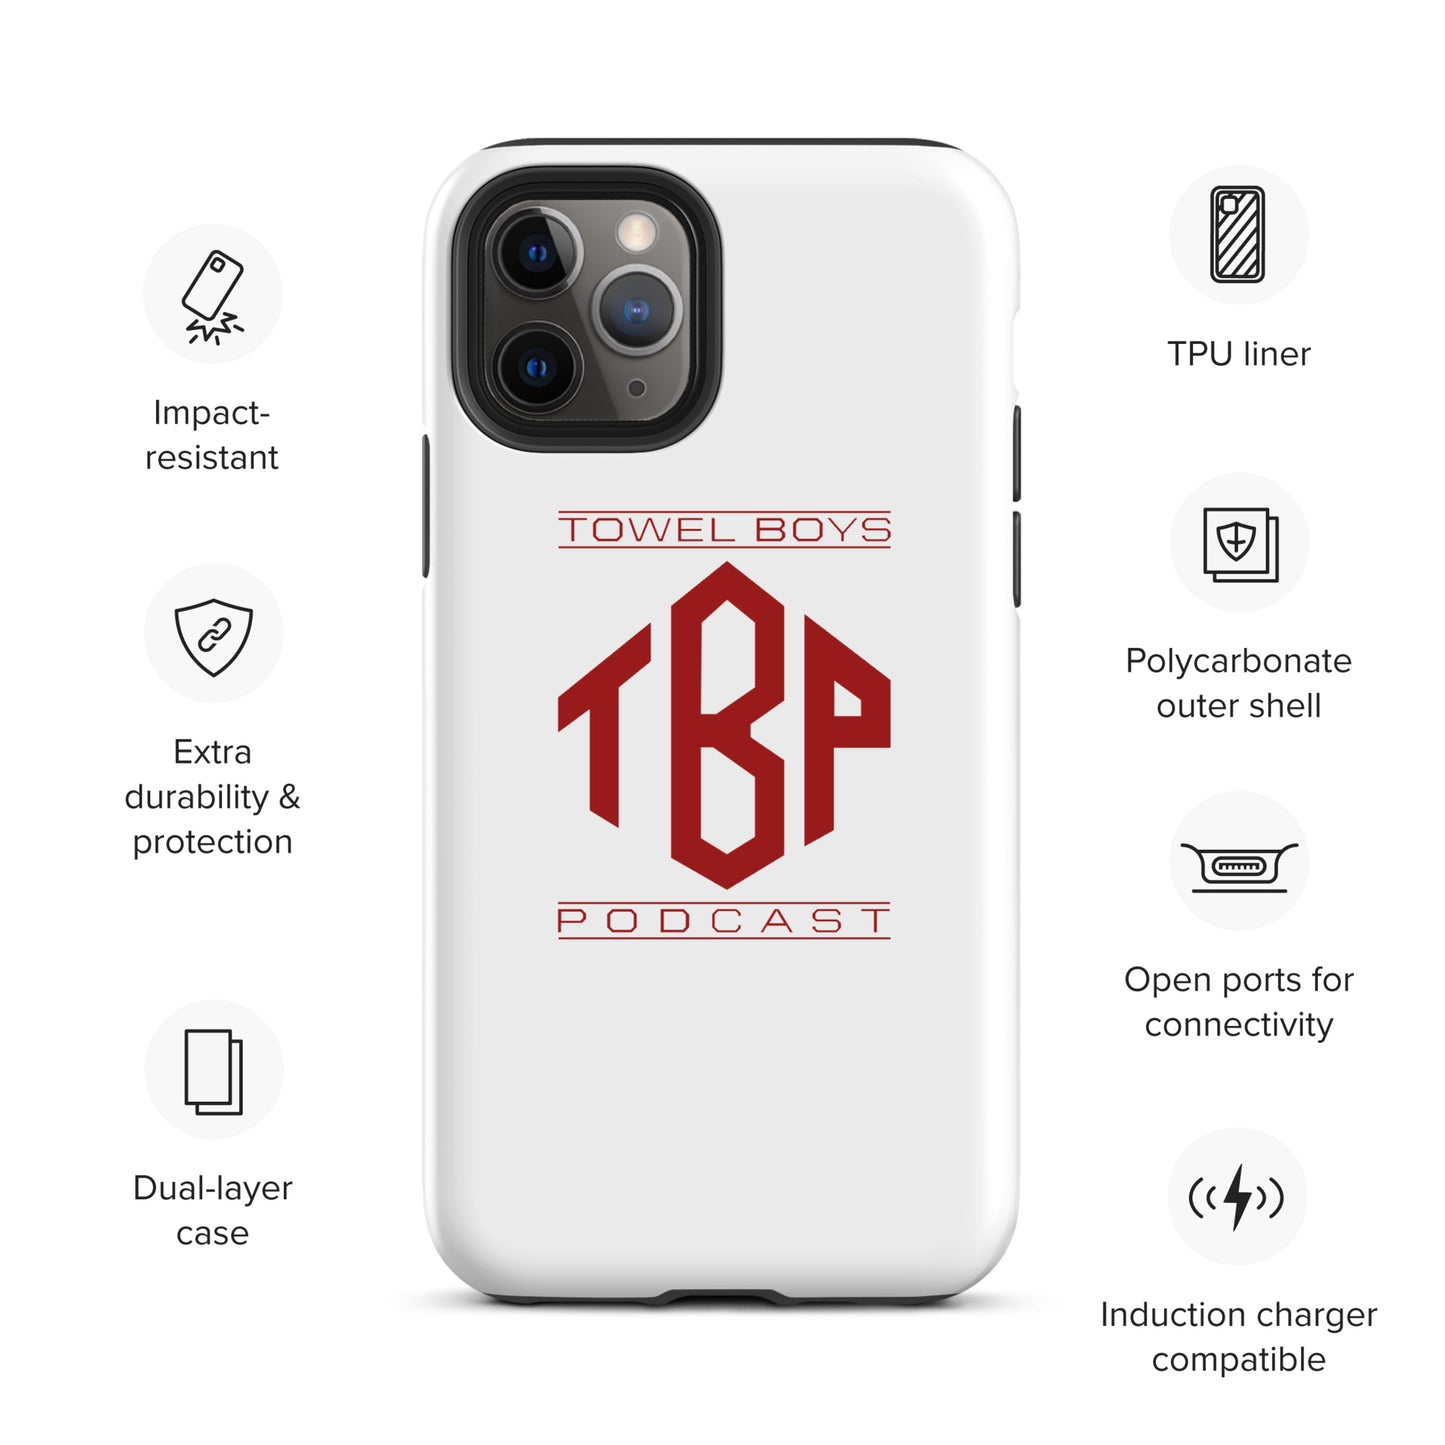 Towel Boys Podcast - Tough Case for iPhone